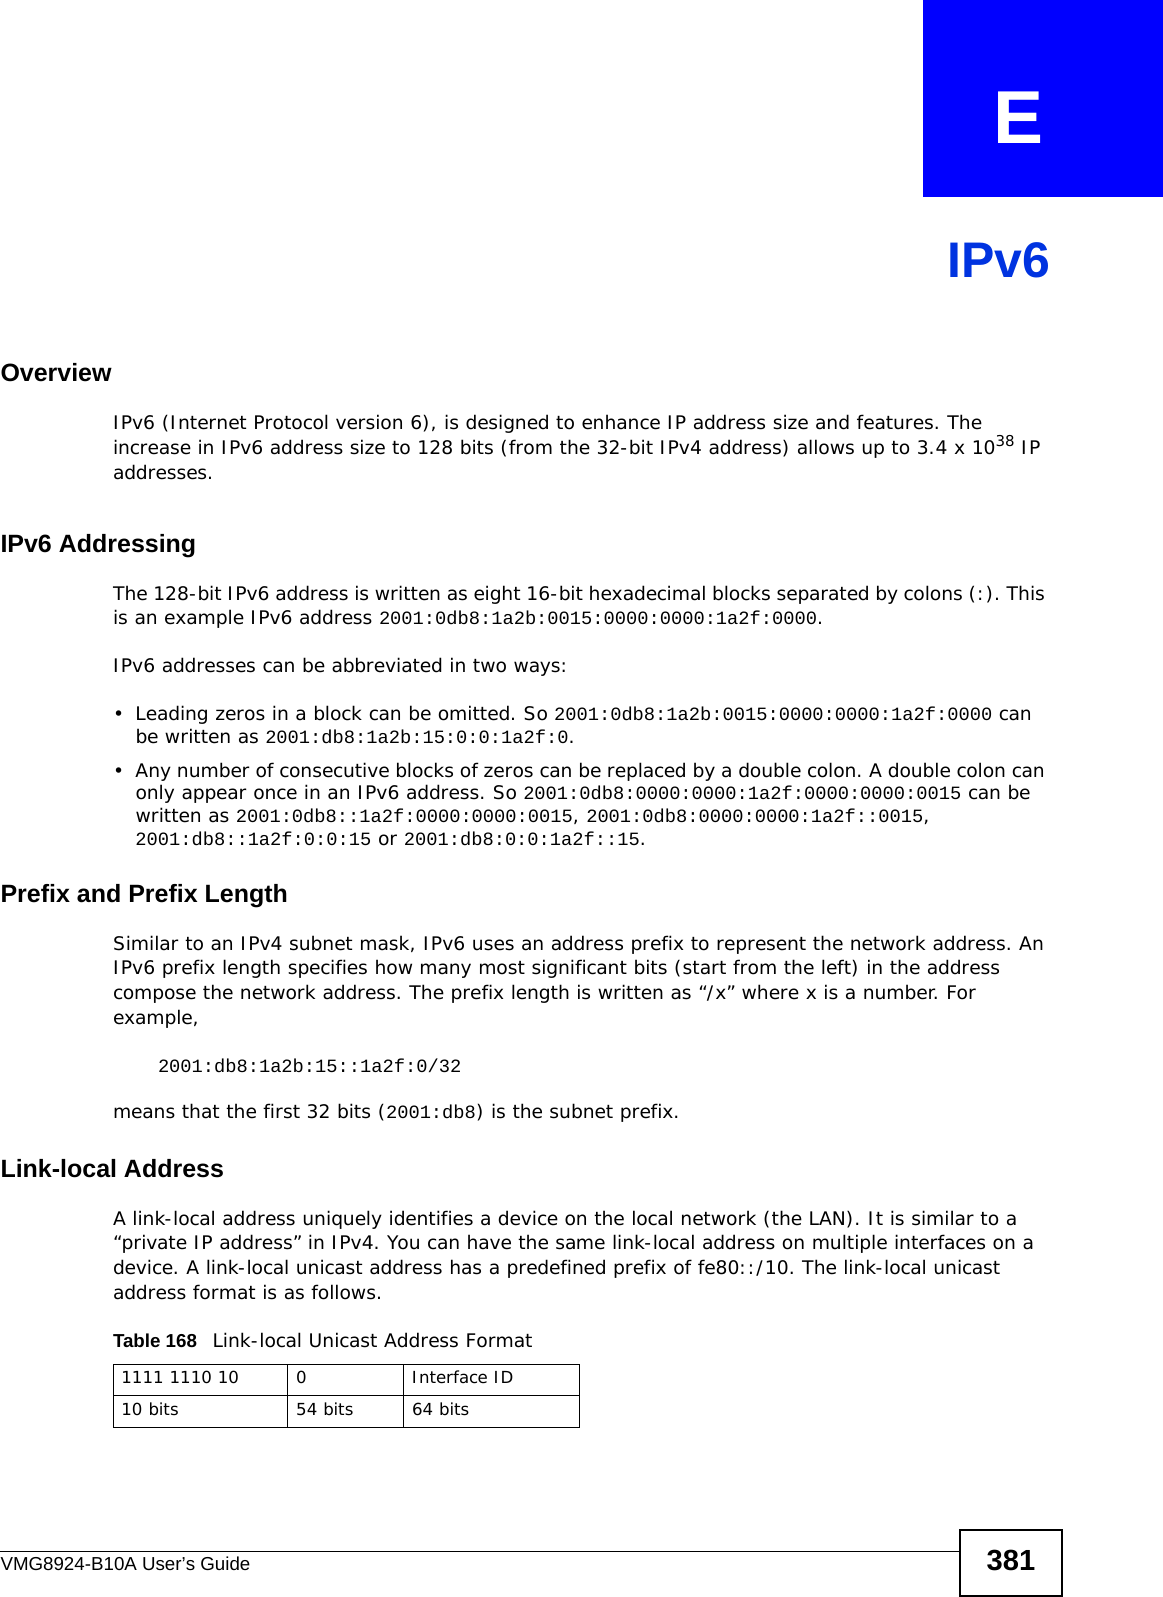 VMG8924-B10A User’s Guide 381APPENDIX   EIPv6OverviewIPv6 (Internet Protocol version 6), is designed to enhance IP address size and features. The increase in IPv6 address size to 128 bits (from the 32-bit IPv4 address) allows up to 3.4 x 1038 IP addresses. IPv6 AddressingThe 128-bit IPv6 address is written as eight 16-bit hexadecimal blocks separated by colons (:). This is an example IPv6 address 2001:0db8:1a2b:0015:0000:0000:1a2f:0000. IPv6 addresses can be abbreviated in two ways:• Leading zeros in a block can be omitted. So 2001:0db8:1a2b:0015:0000:0000:1a2f:0000 can be written as 2001:db8:1a2b:15:0:0:1a2f:0. • Any number of consecutive blocks of zeros can be replaced by a double colon. A double colon can only appear once in an IPv6 address. So 2001:0db8:0000:0000:1a2f:0000:0000:0015 can be written as 2001:0db8::1a2f:0000:0000:0015, 2001:0db8:0000:0000:1a2f::0015, 2001:db8::1a2f:0:0:15 or 2001:db8:0:0:1a2f::15.Prefix and Prefix LengthSimilar to an IPv4 subnet mask, IPv6 uses an address prefix to represent the network address. An IPv6 prefix length specifies how many most significant bits (start from the left) in the address compose the network address. The prefix length is written as “/x” where x is a number. For example, 2001:db8:1a2b:15::1a2f:0/32means that the first 32 bits (2001:db8) is the subnet prefix. Link-local AddressA link-local address uniquely identifies a device on the local network (the LAN). It is similar to a “private IP address” in IPv4. You can have the same link-local address on multiple interfaces on a device. A link-local unicast address has a predefined prefix of fe80::/10. The link-local unicast address format is as follows.Table 168   Link-local Unicast Address Format1111 1110 10 0 Interface ID10 bits 54 bits 64 bits